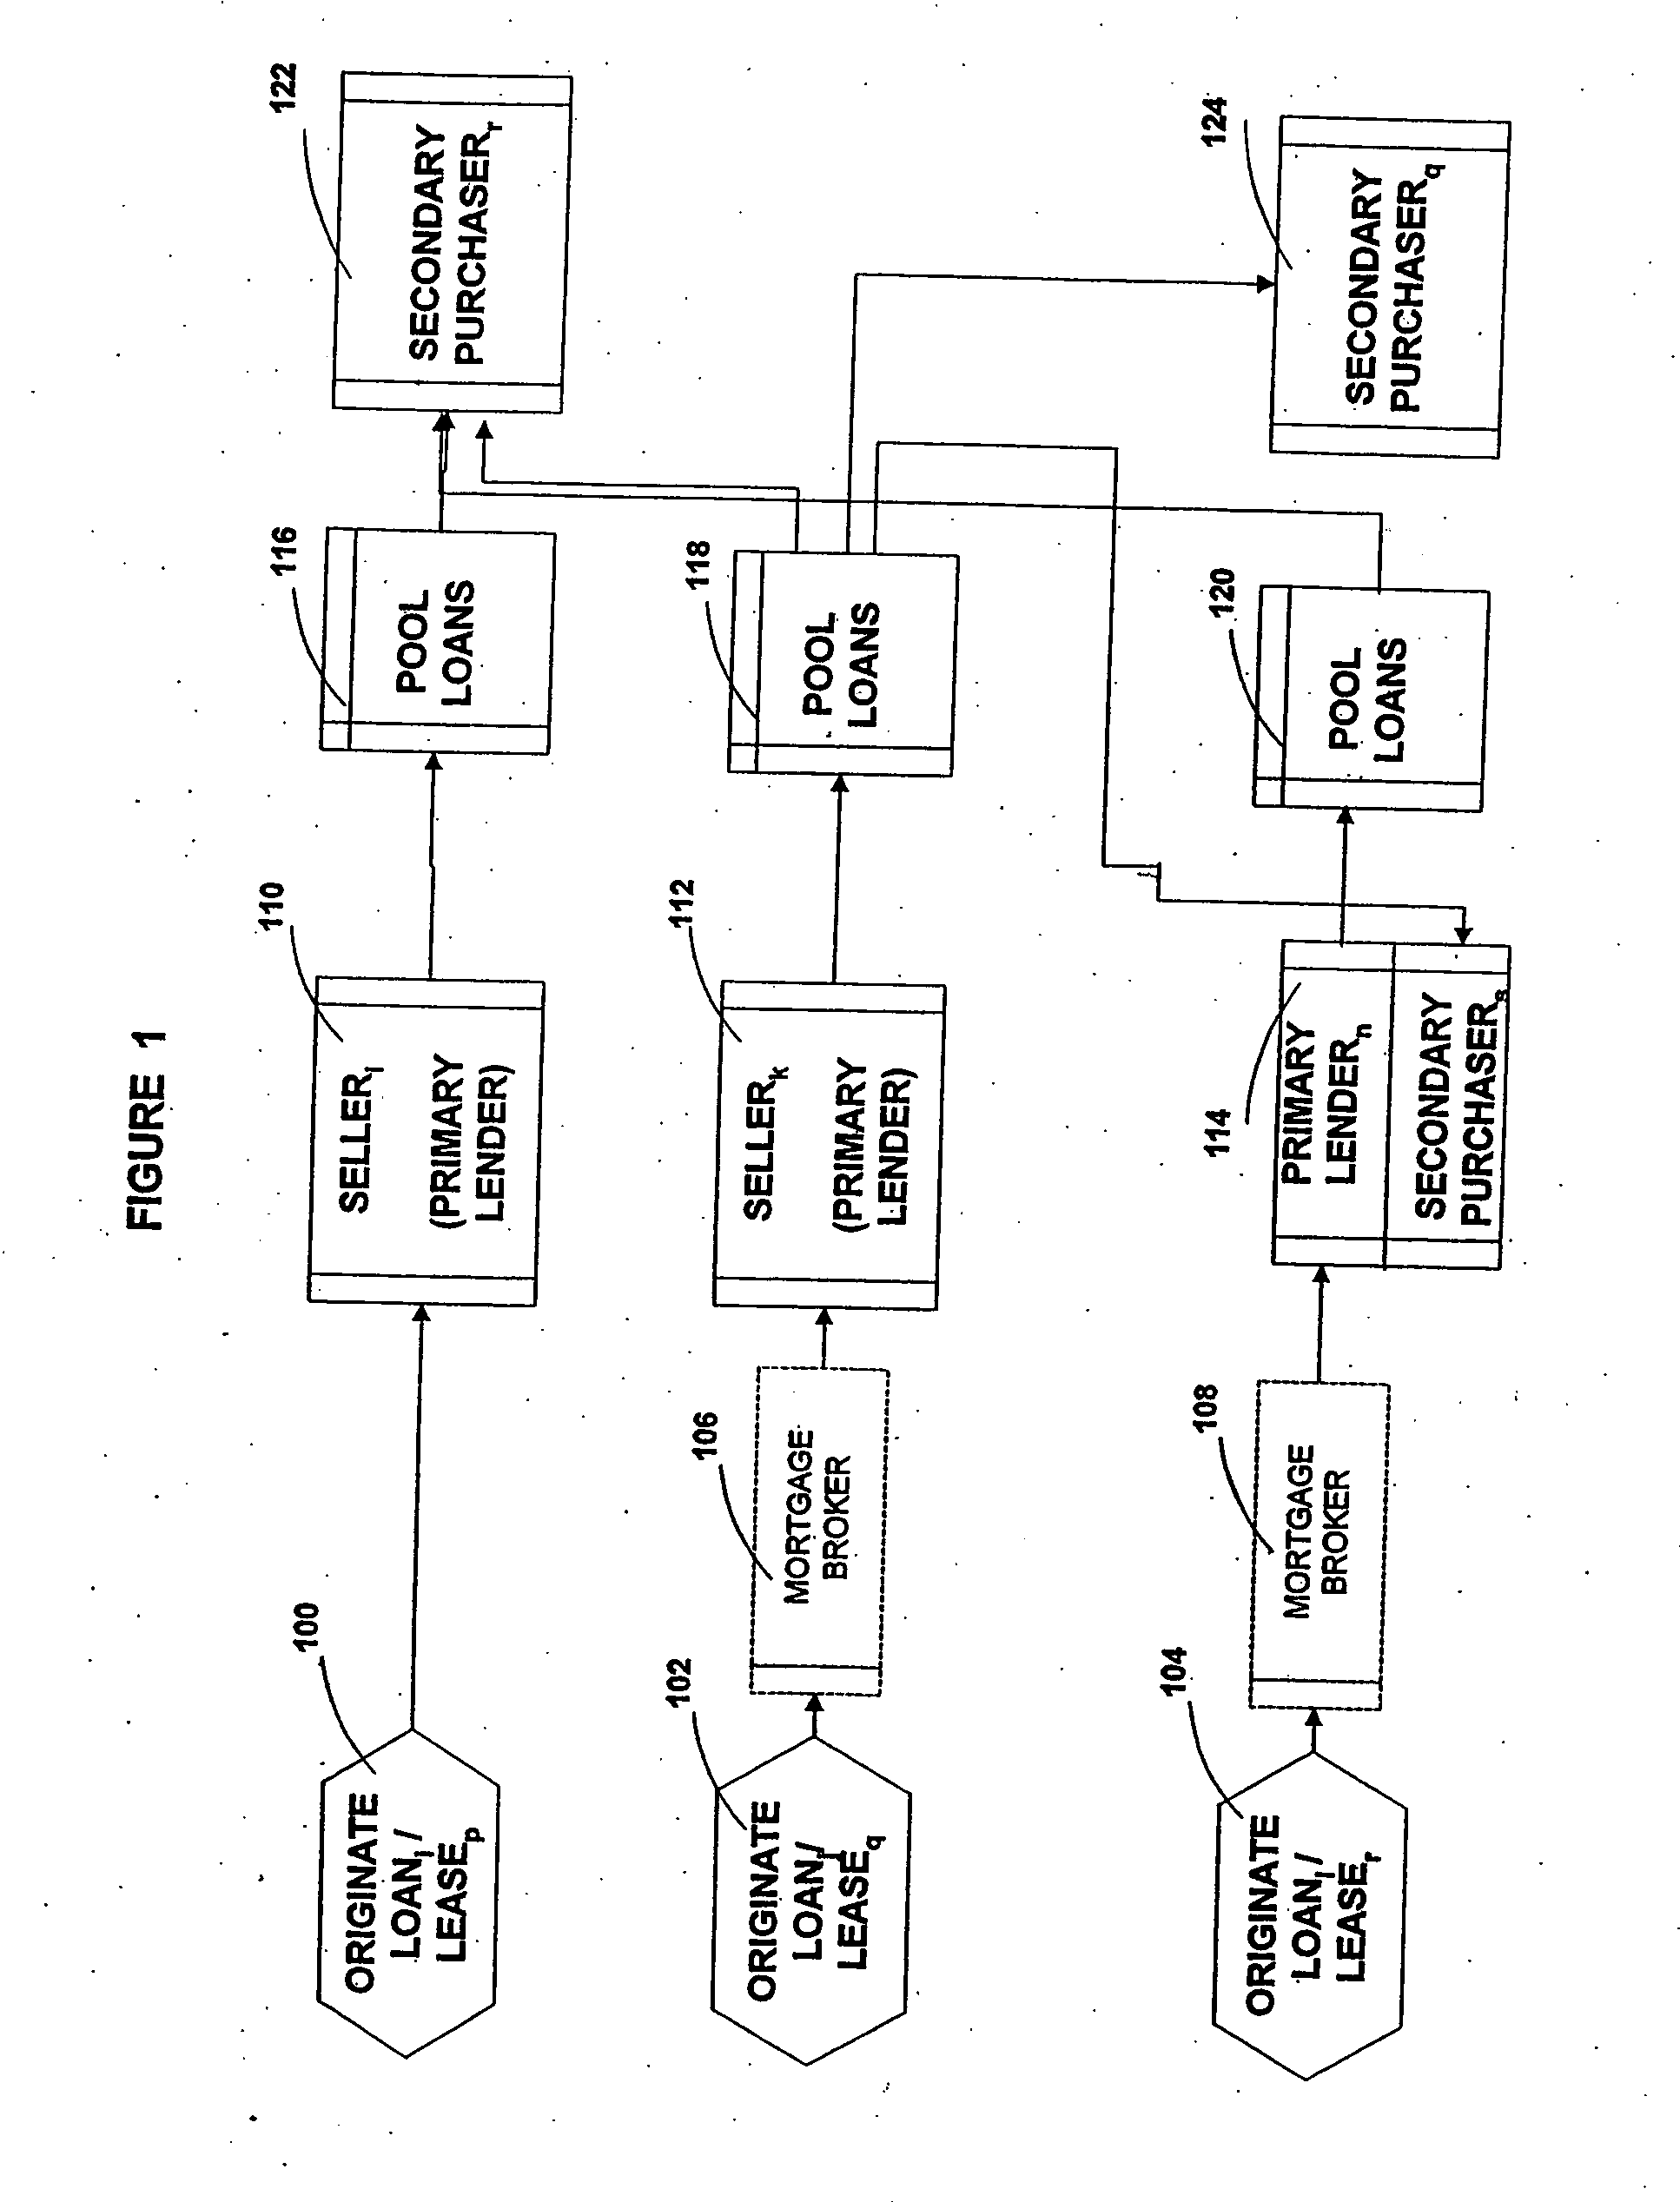 Method and system for facilitating opportunistic transactions